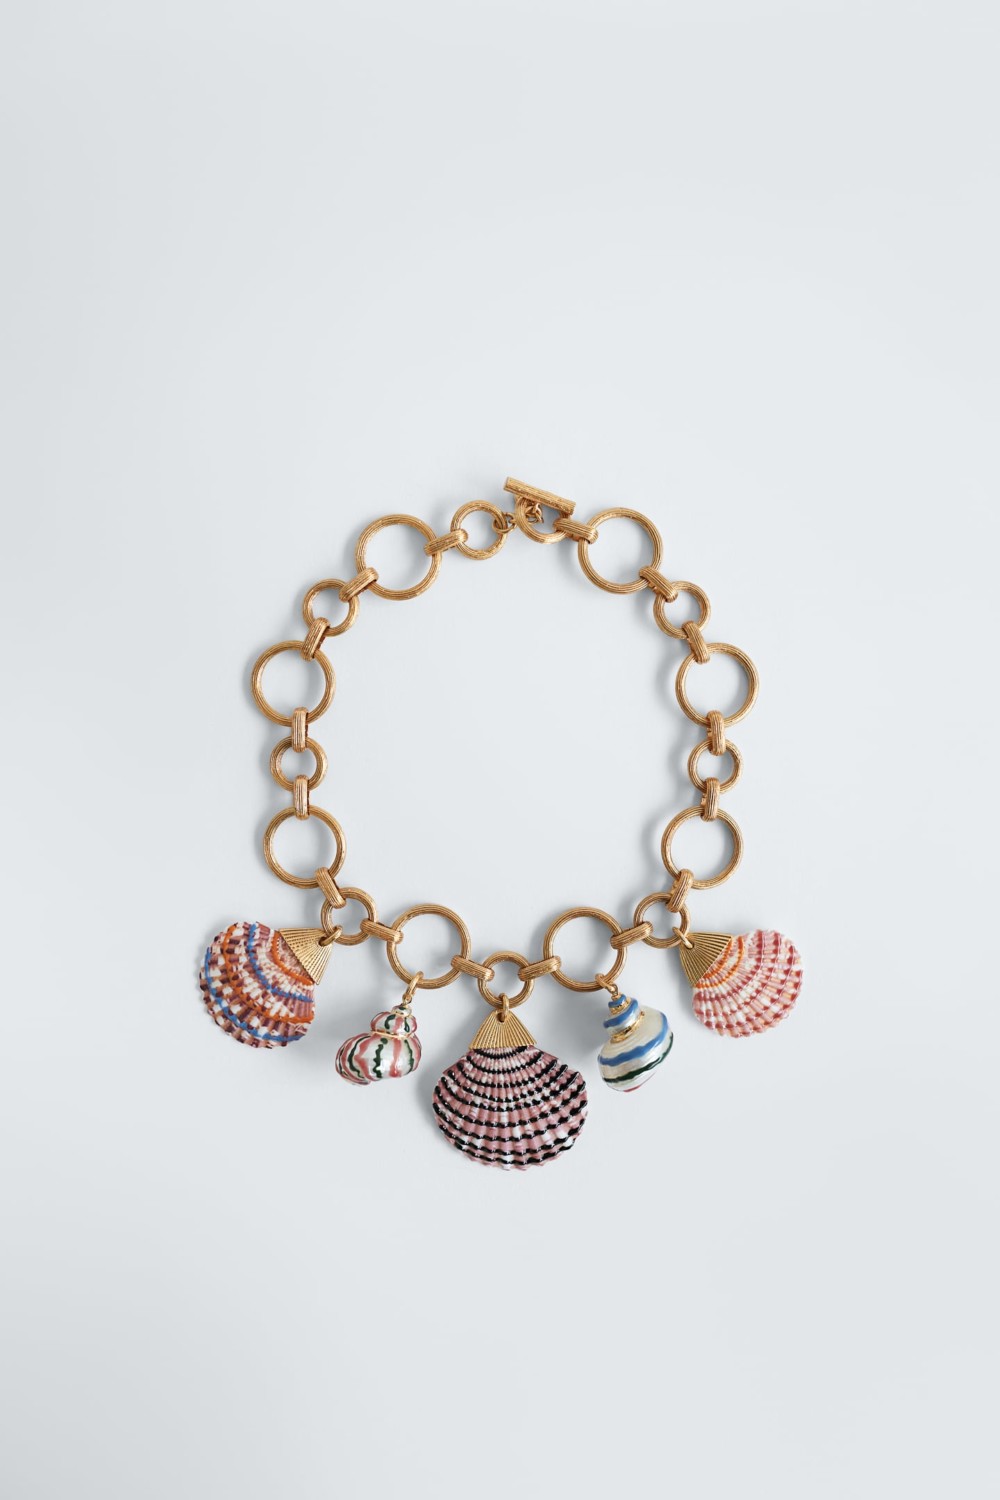 Fashion Blog Mode Tendance Ete 2020 Bijou Jewelry Zara Collier Necklace Maillon Or Gold Shell Coquillage Colors Couleurs